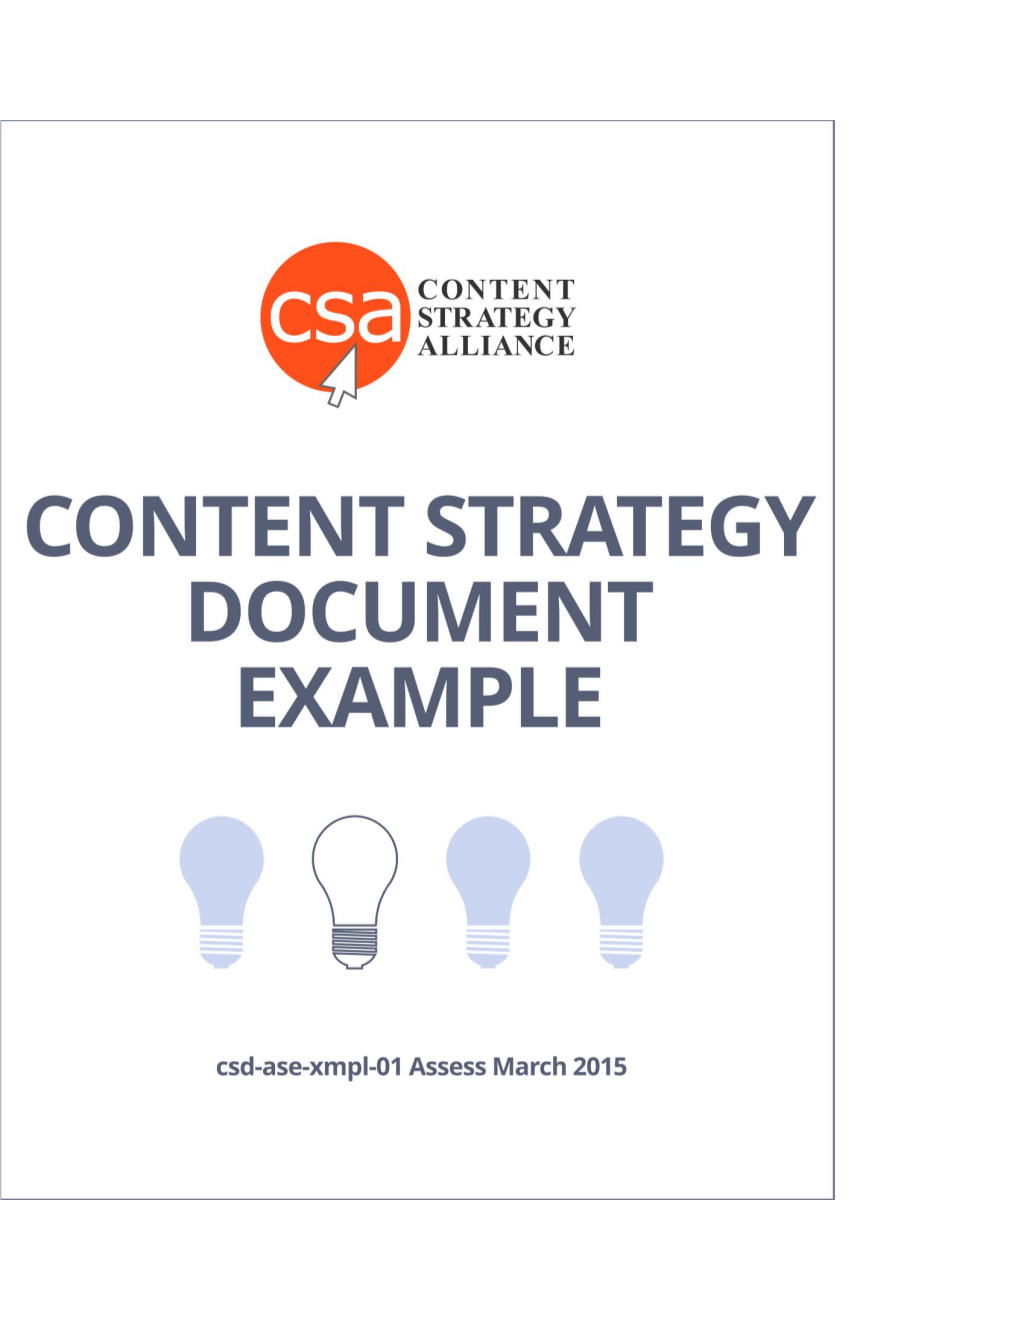 CSA Content Strategy Document Example